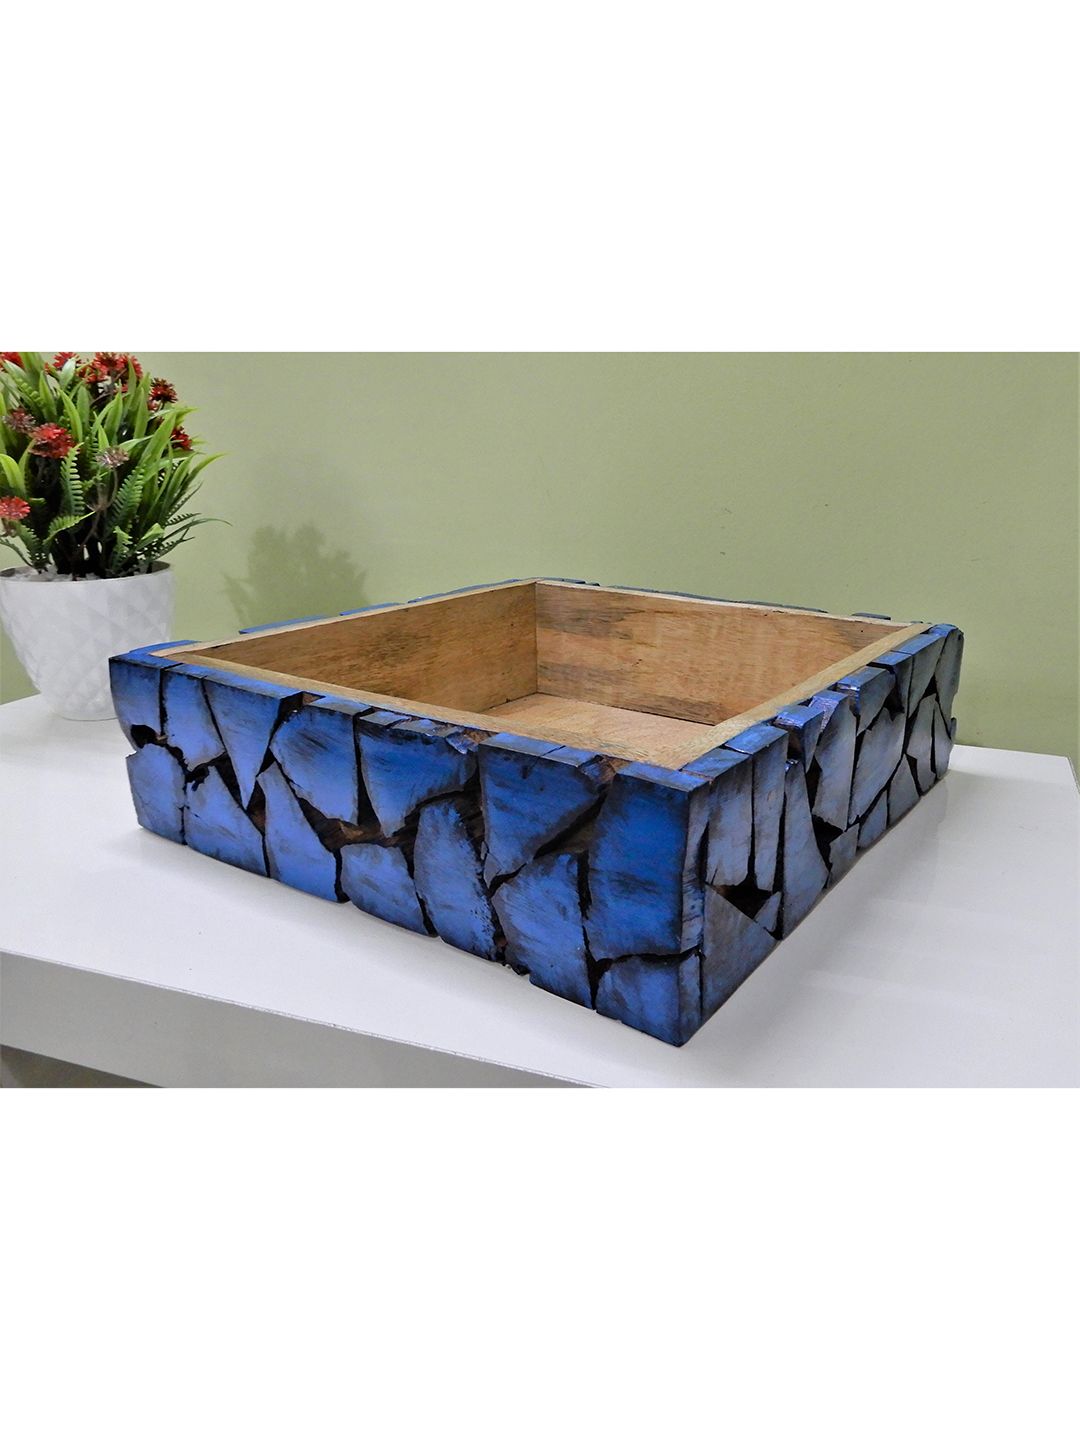 Disoo Fashions Blue Solid Wood Tray with Mosaic Art & Distress Finish Price in India